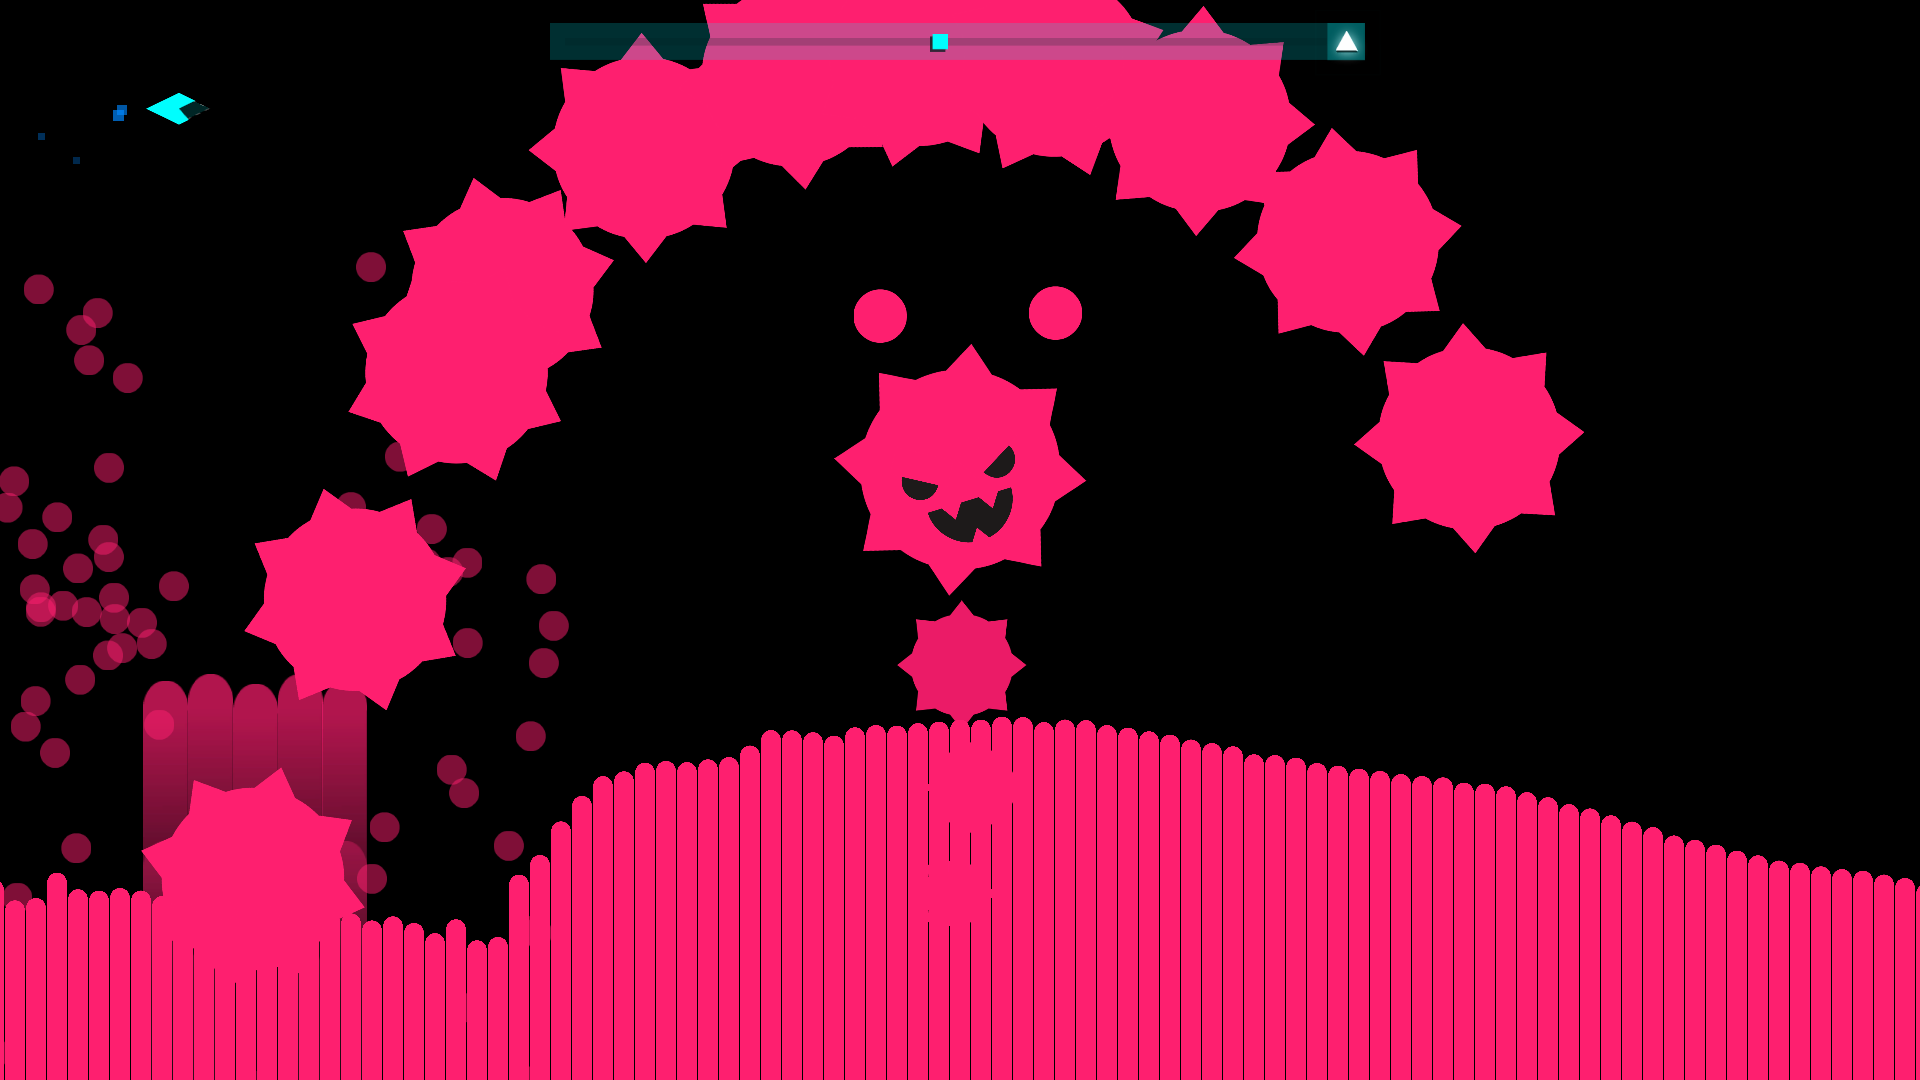 just shapes and beats beta level editor